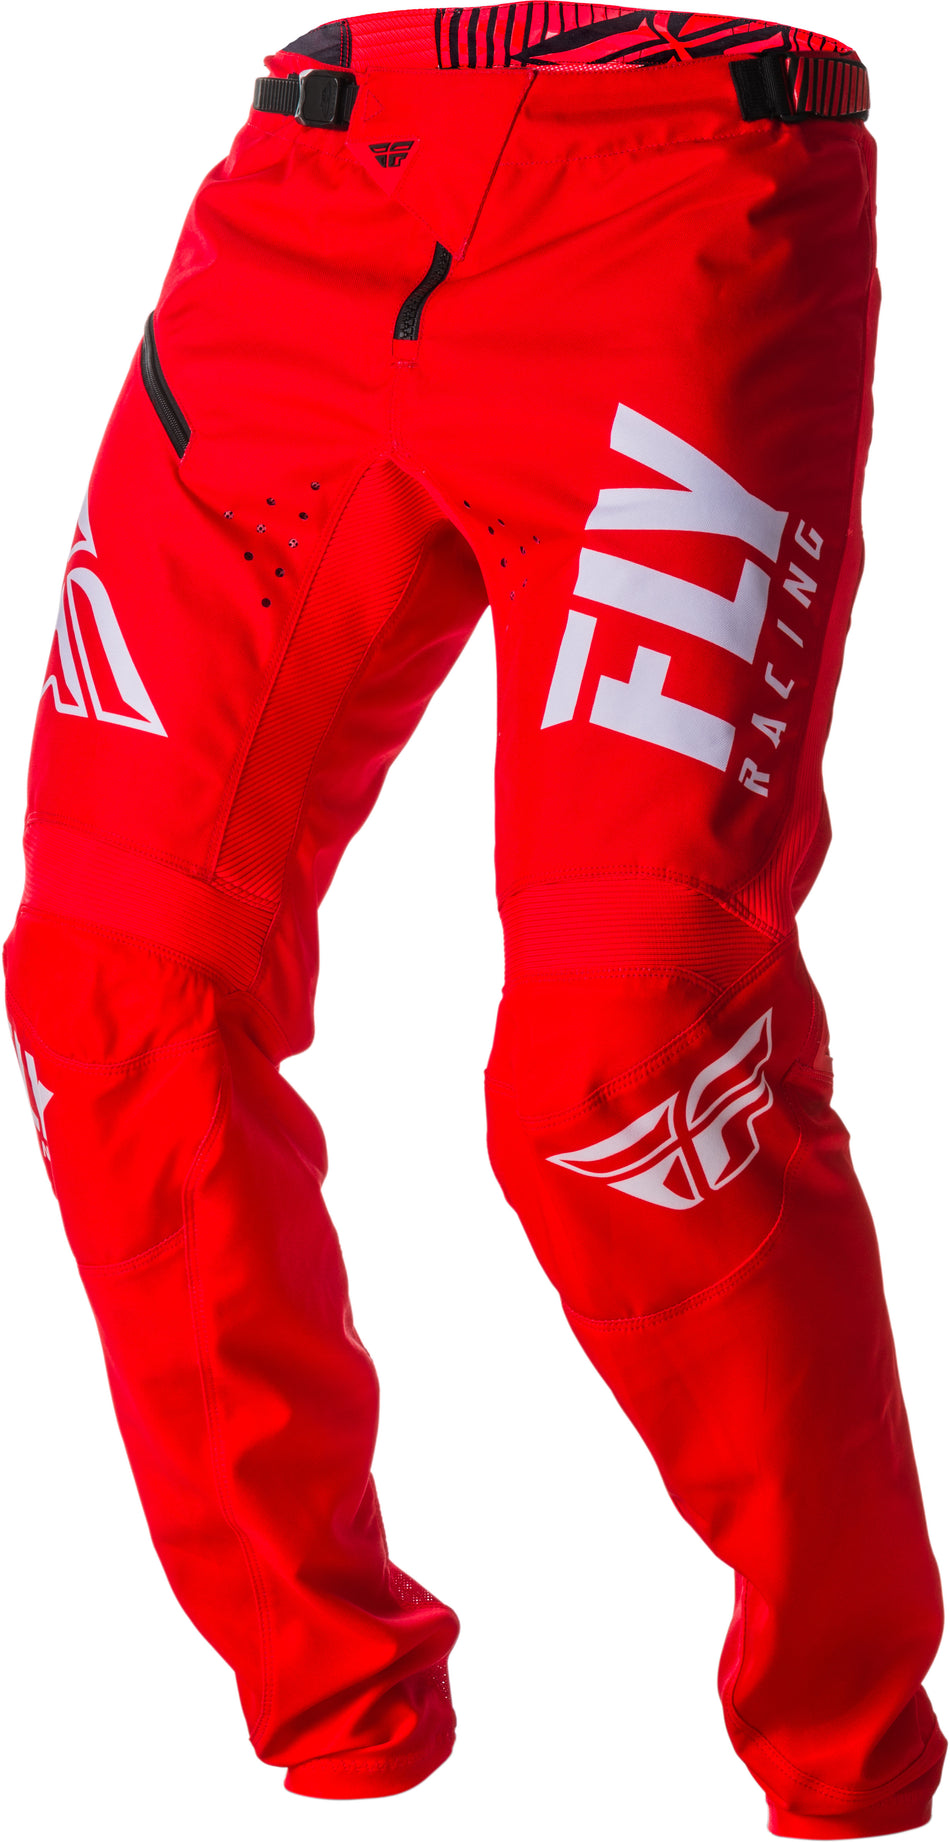 FLY RACING Kinetic Shield Bicycle Pants Red/White Sz 36 372-02236